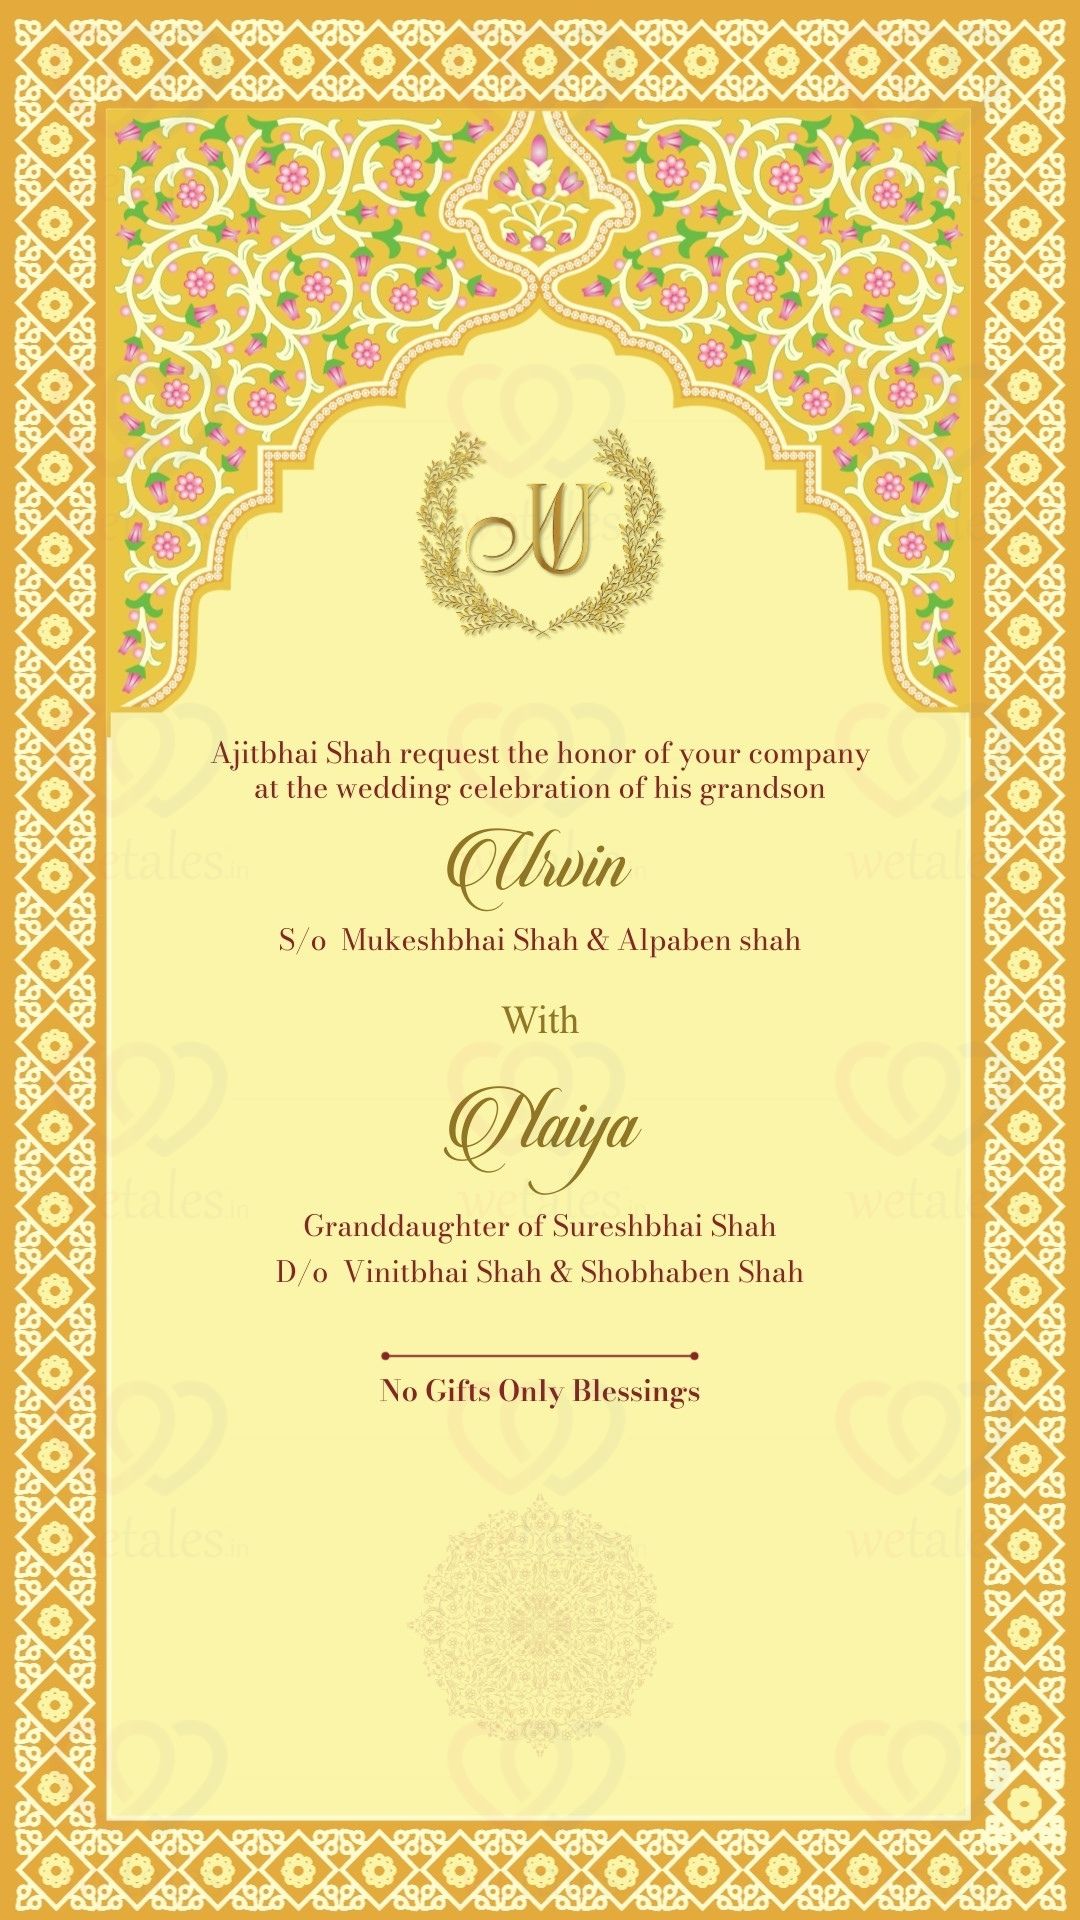 Simple Invitation Card 16745 with | My Shadi Cards